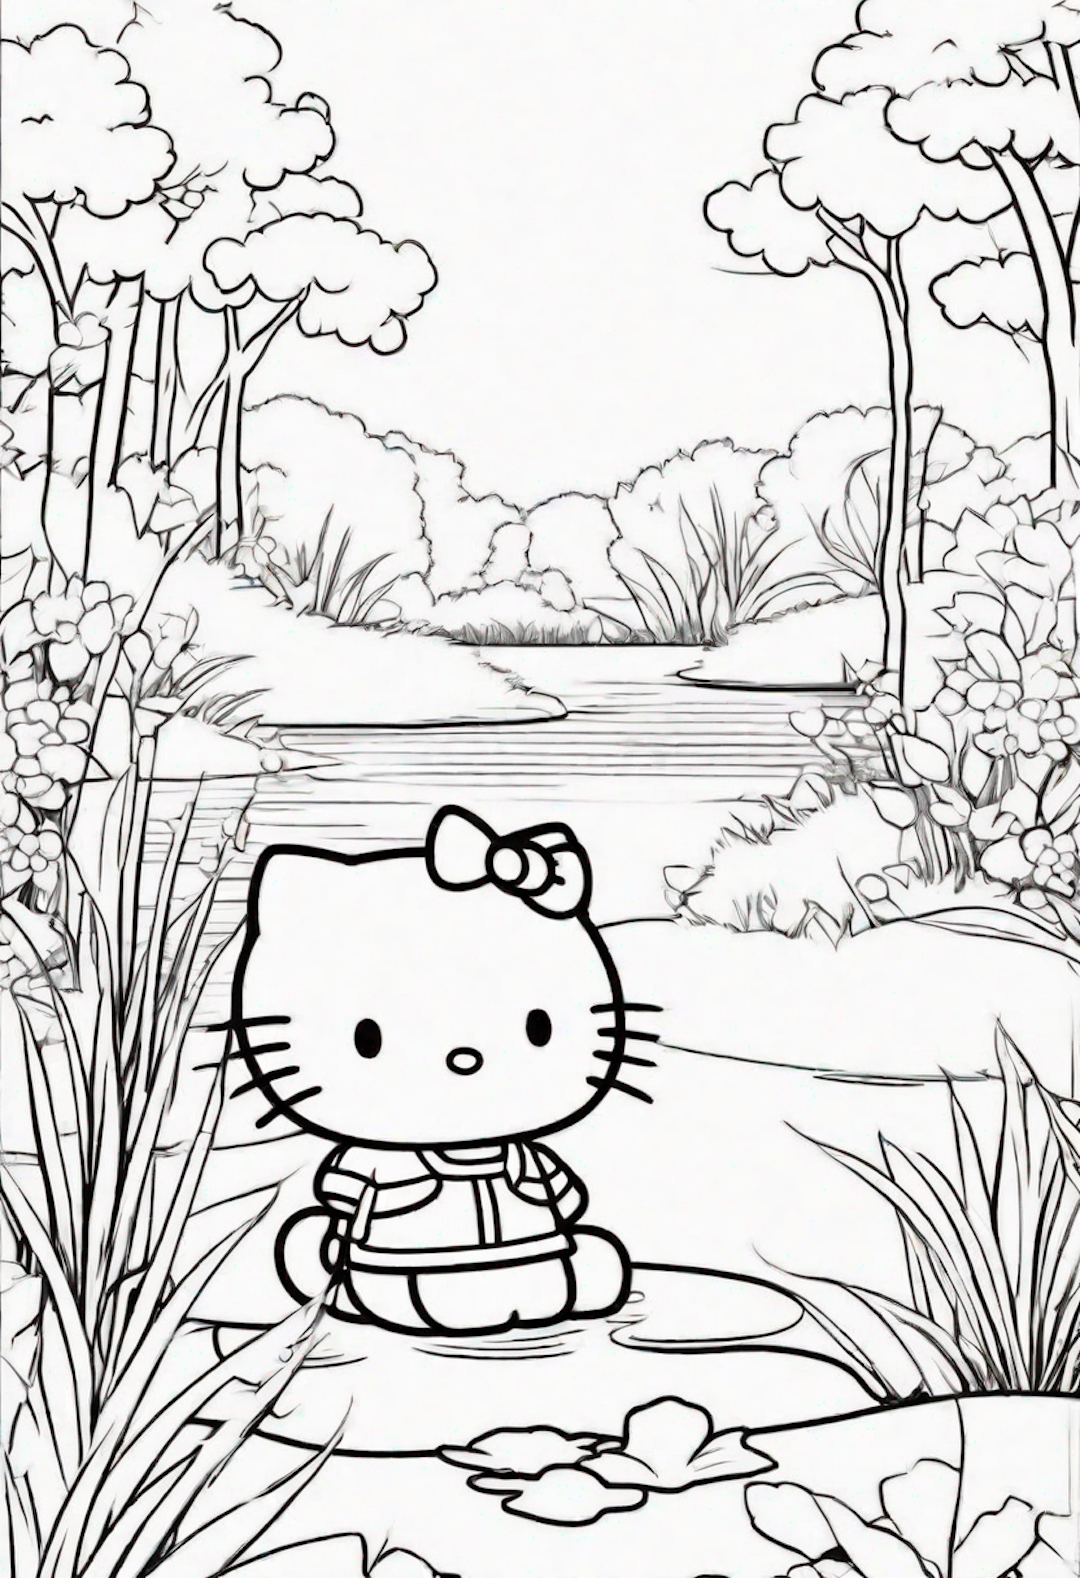 Hello Kitty at a Pond